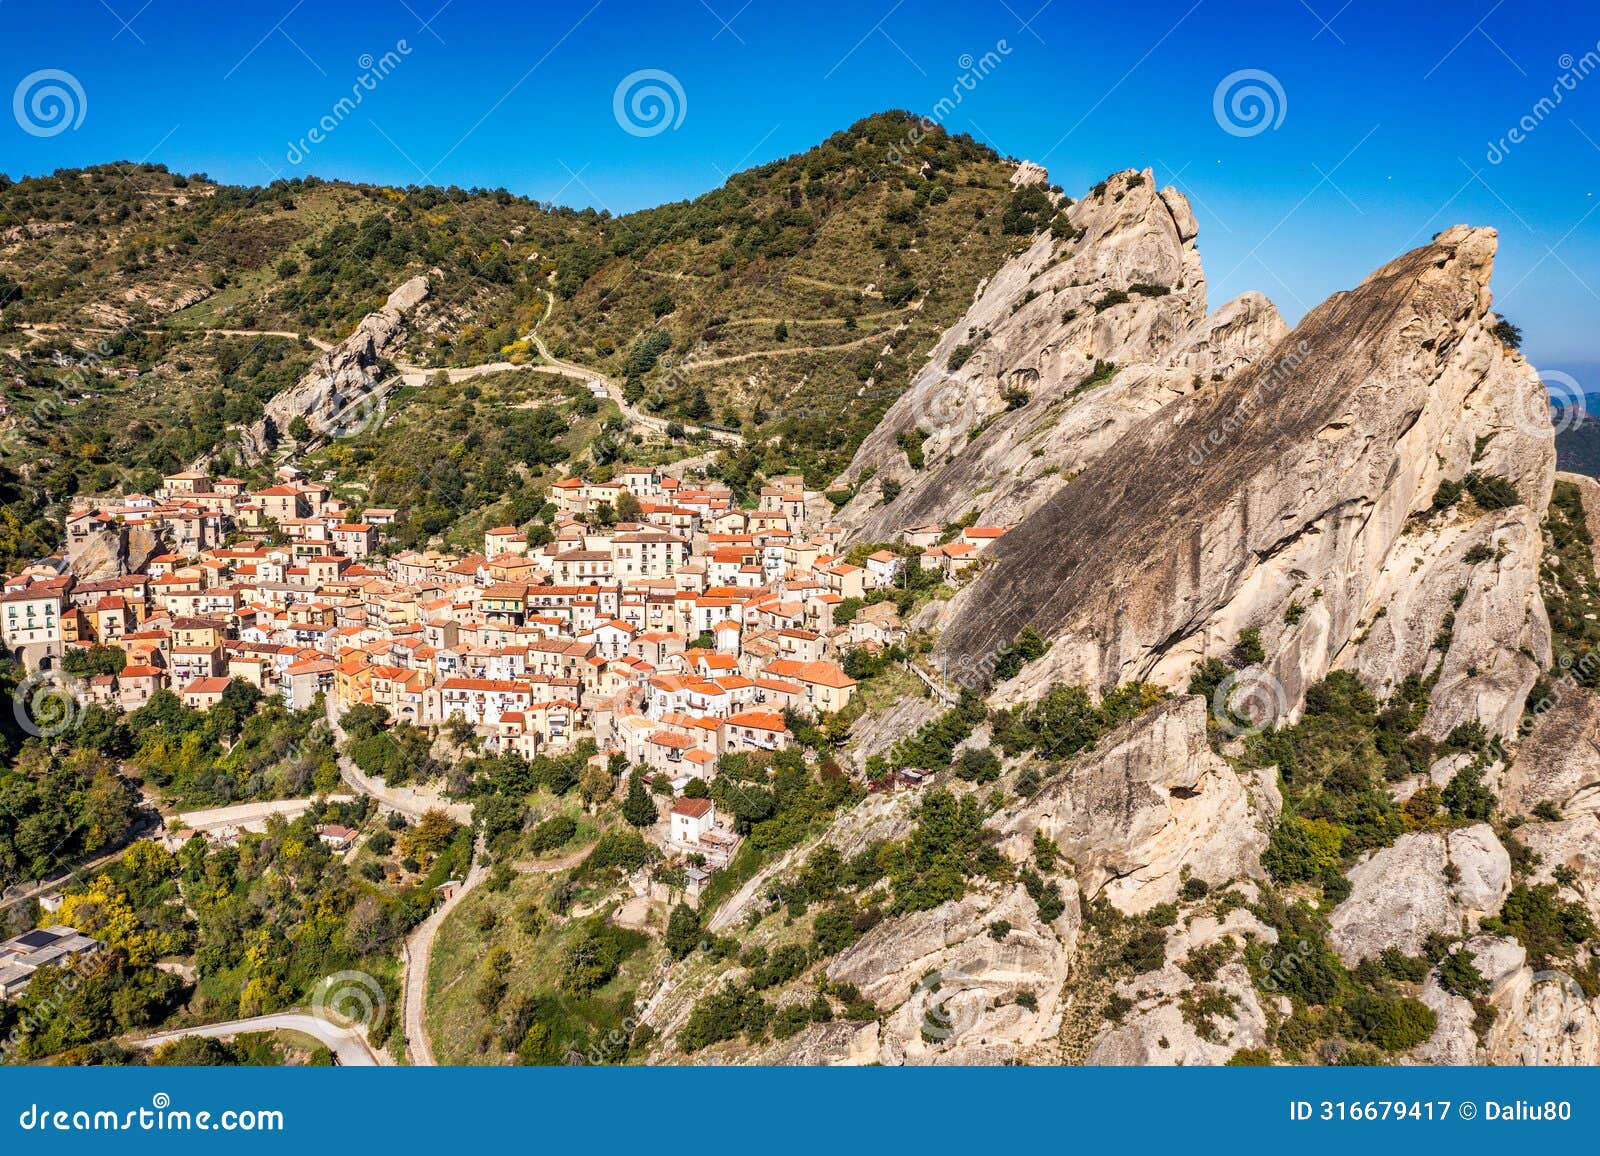 the picturesque village of castelmezzano, province of potenza, basilicata, italy. cityscape aerial view of medieval city of